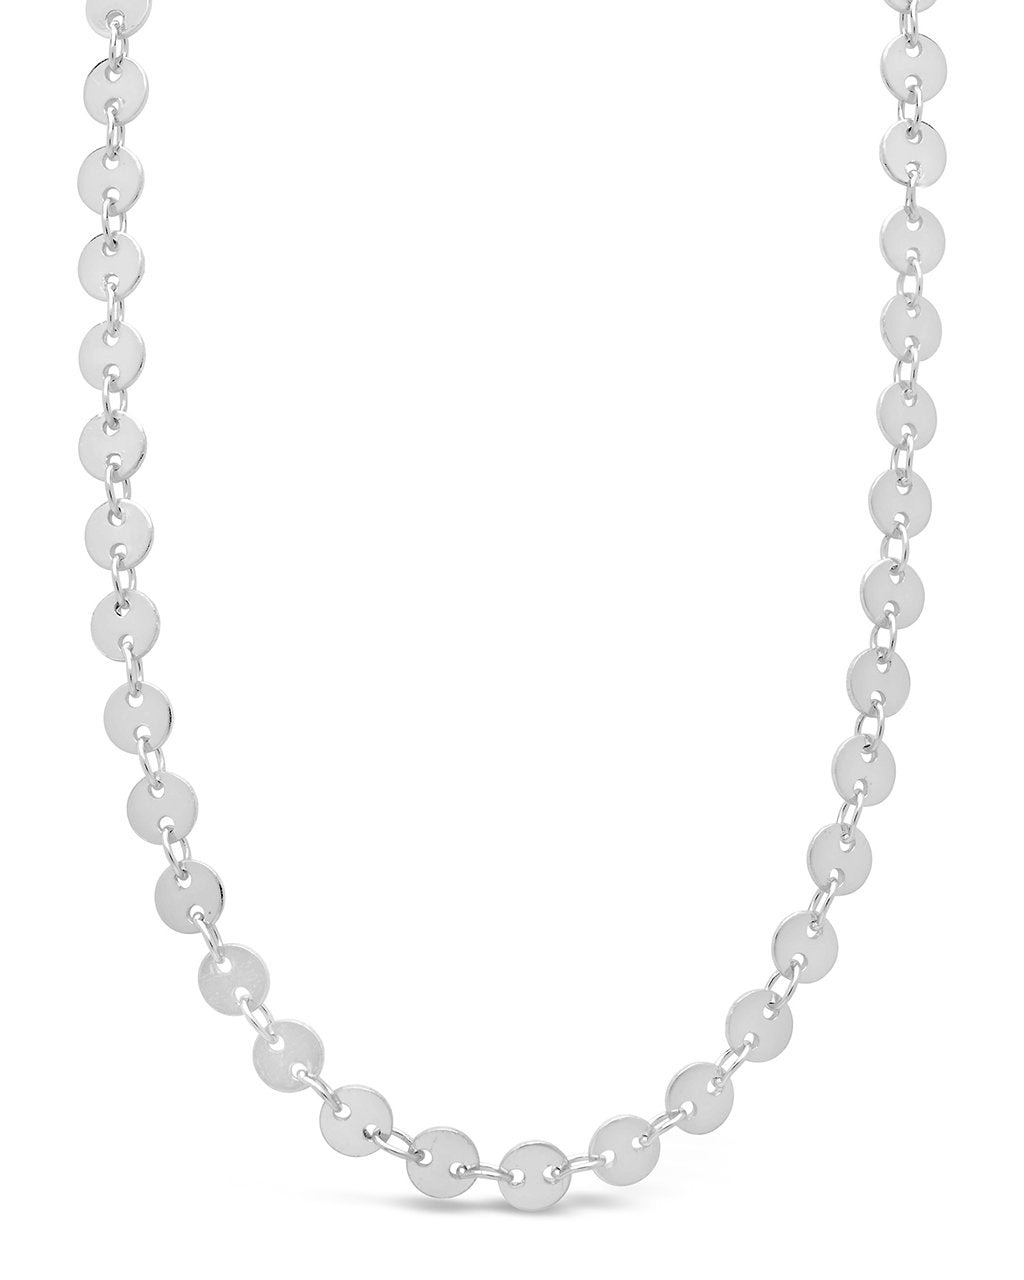 Mini Round Disk Chain Necklace - Sterling Forever